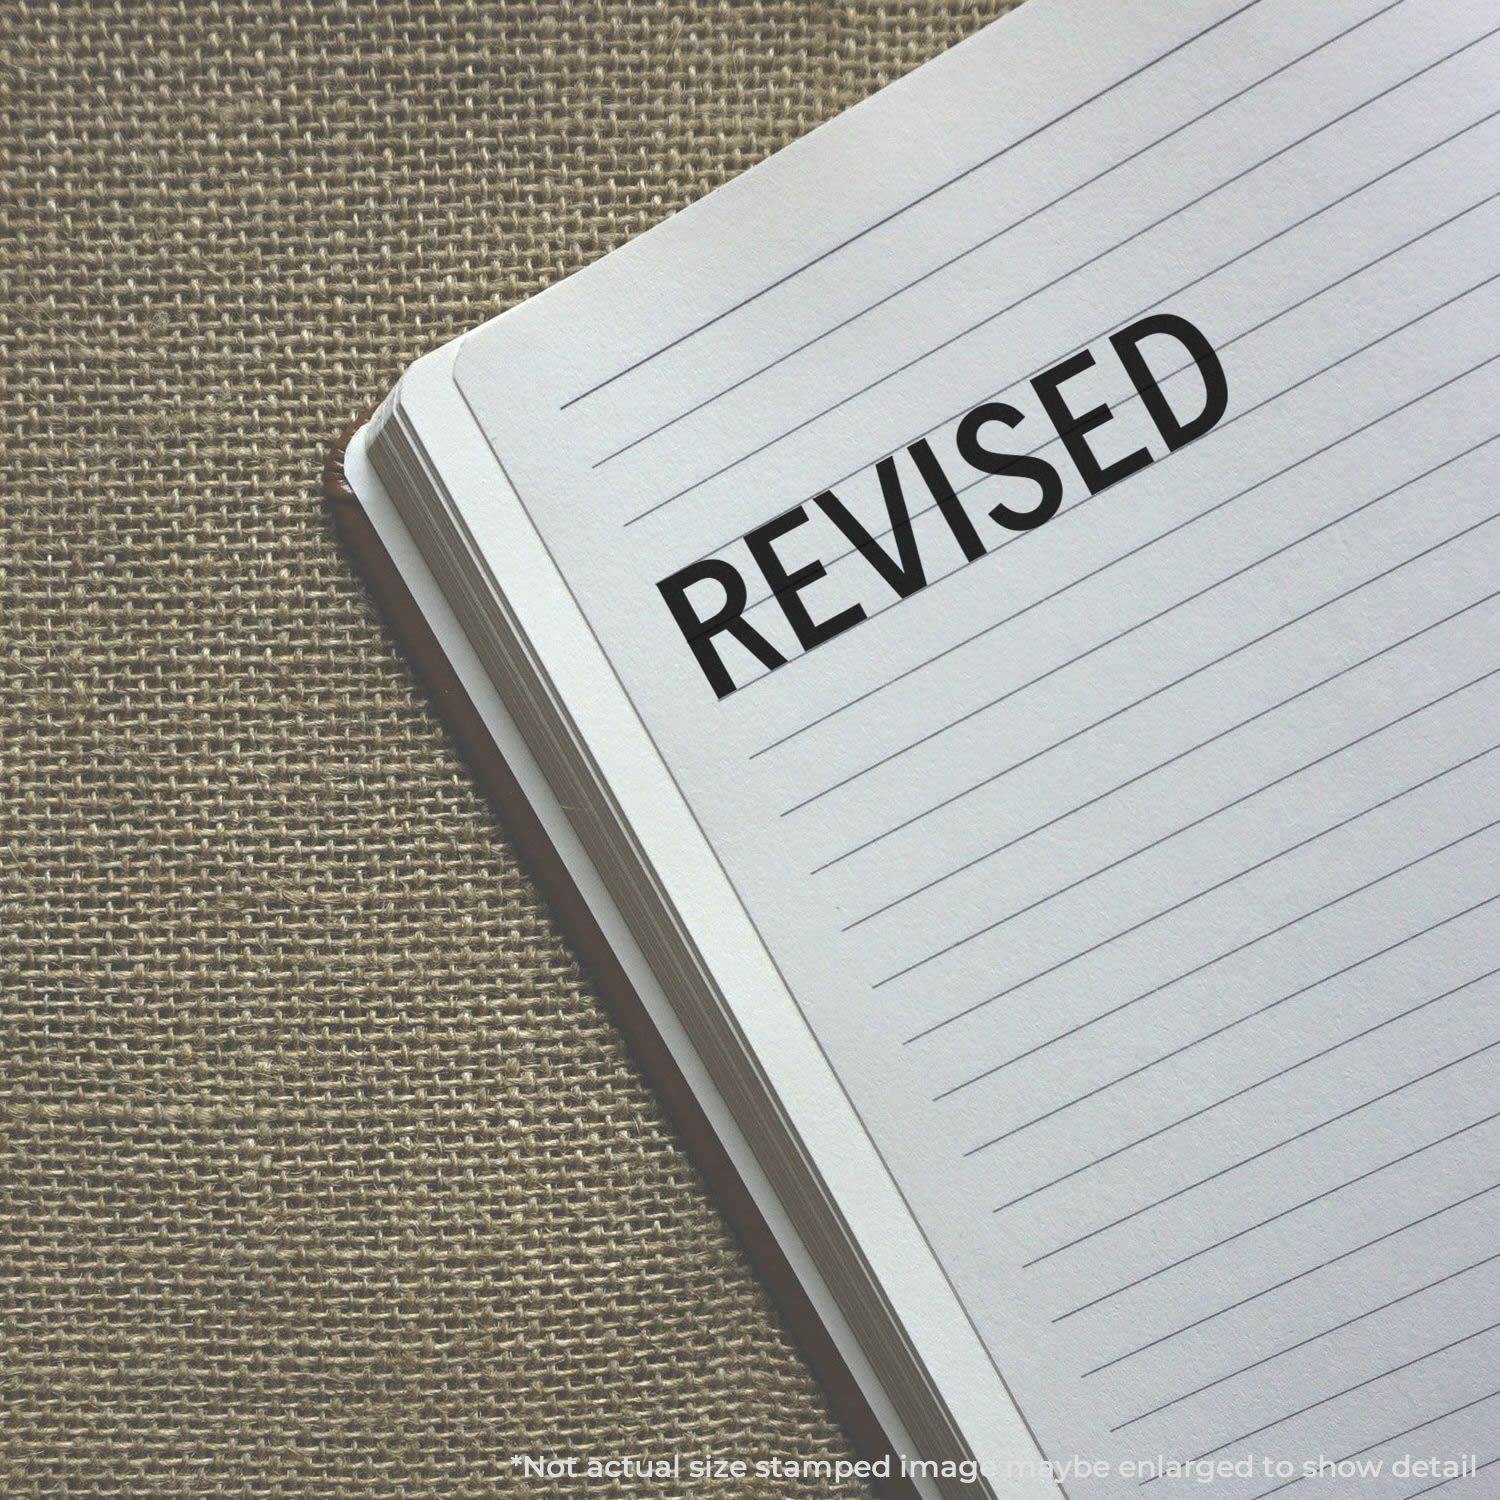 A stock office rubber stamp with a stamped image showing how the text "REVISED" in a large font is displayed after stamping.